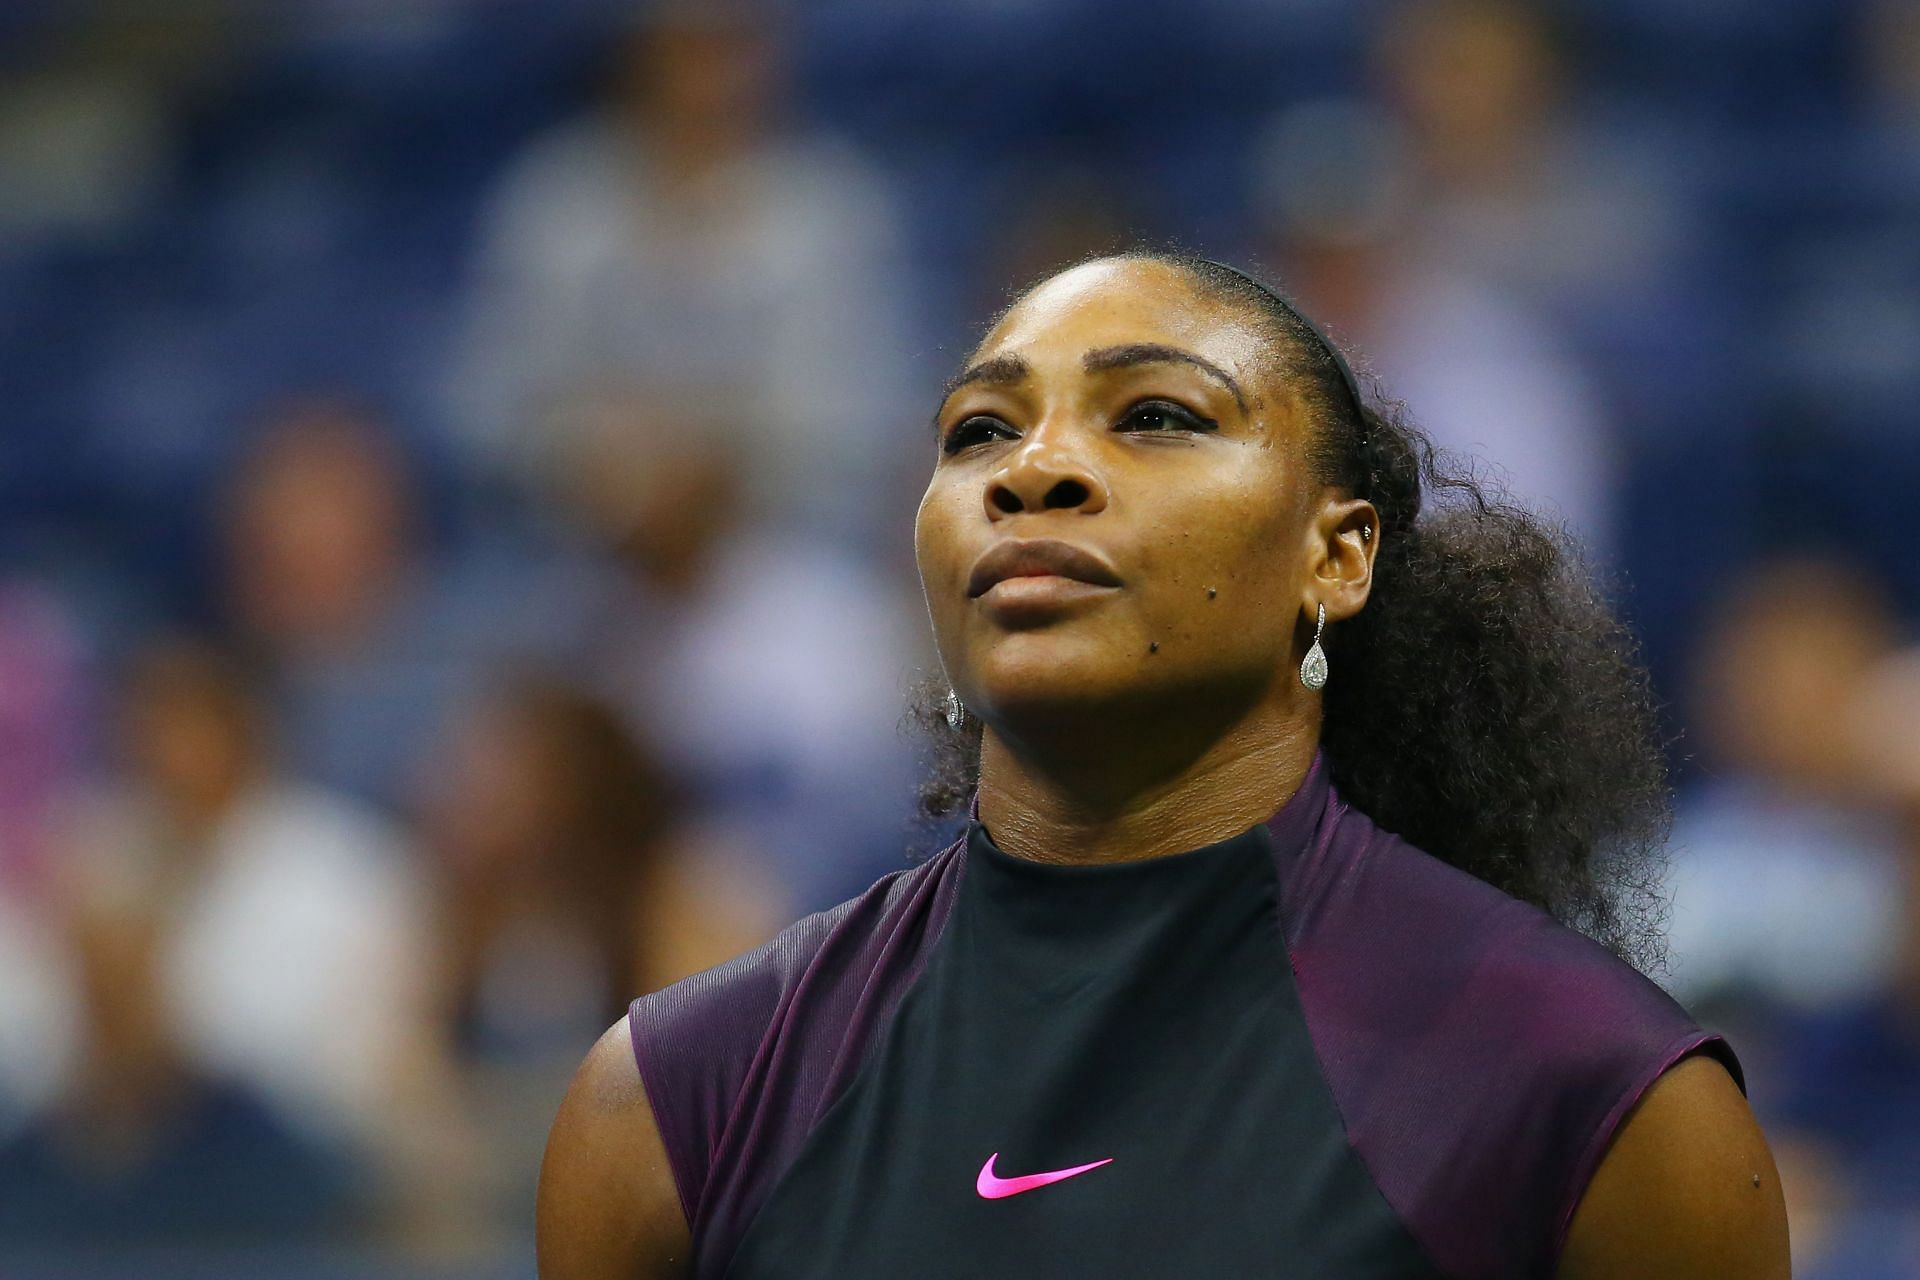 Serena Williams at the 2016 US Open